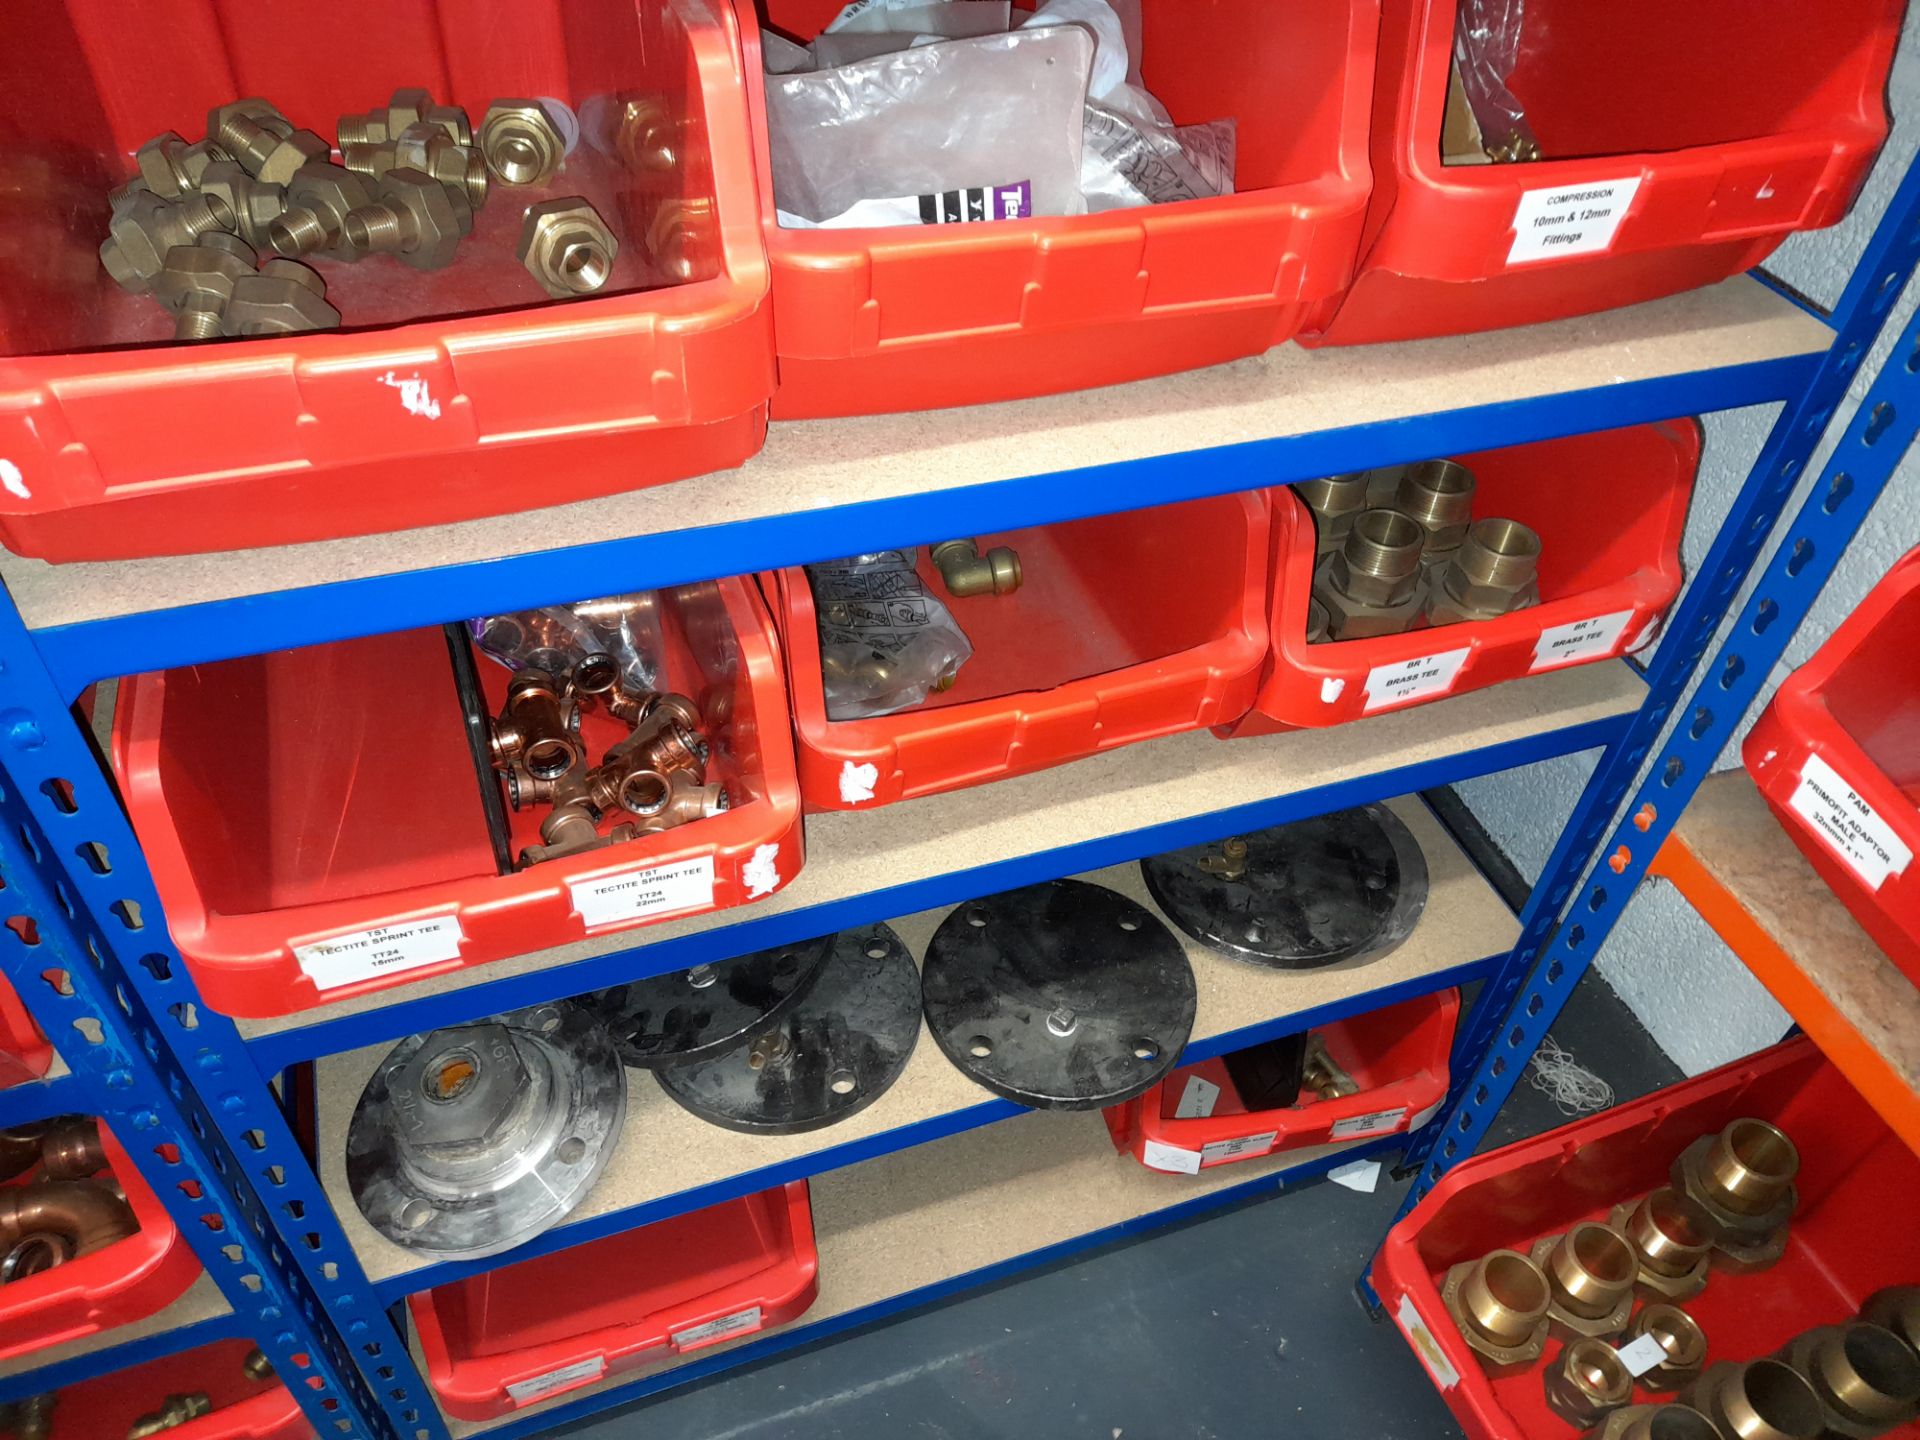 Large Quantity of stock to 3 bays to include sockets, adaptors, compression fittings, elbows ( - Image 4 of 7